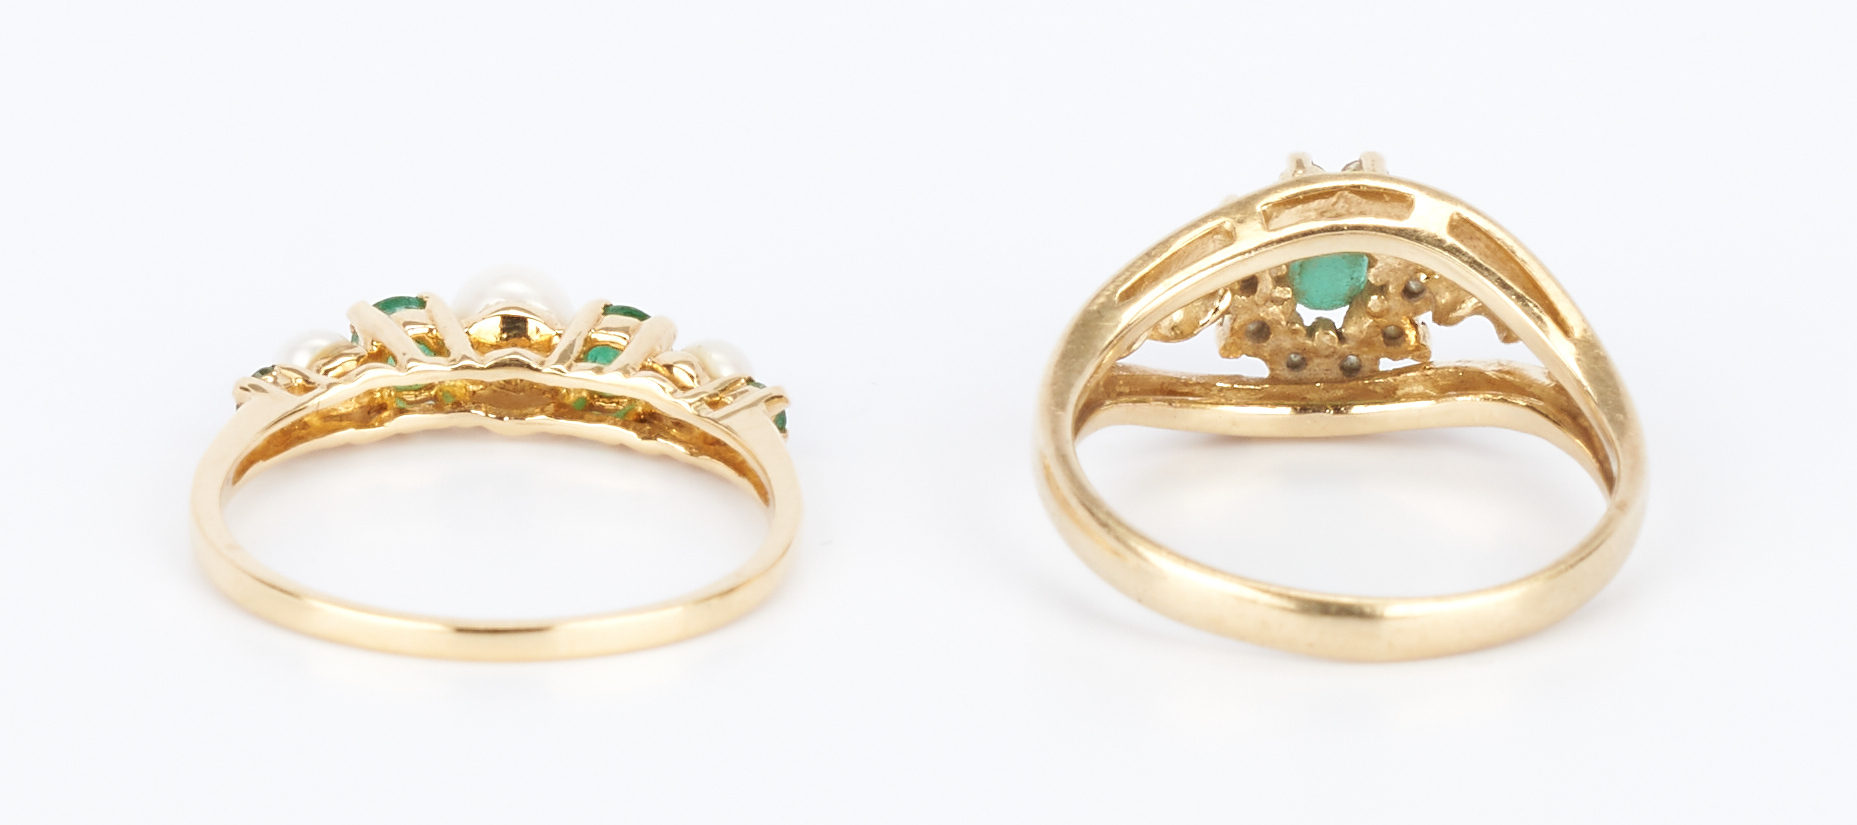 Lot 918: Gold & Emerald Bracelet and Rings